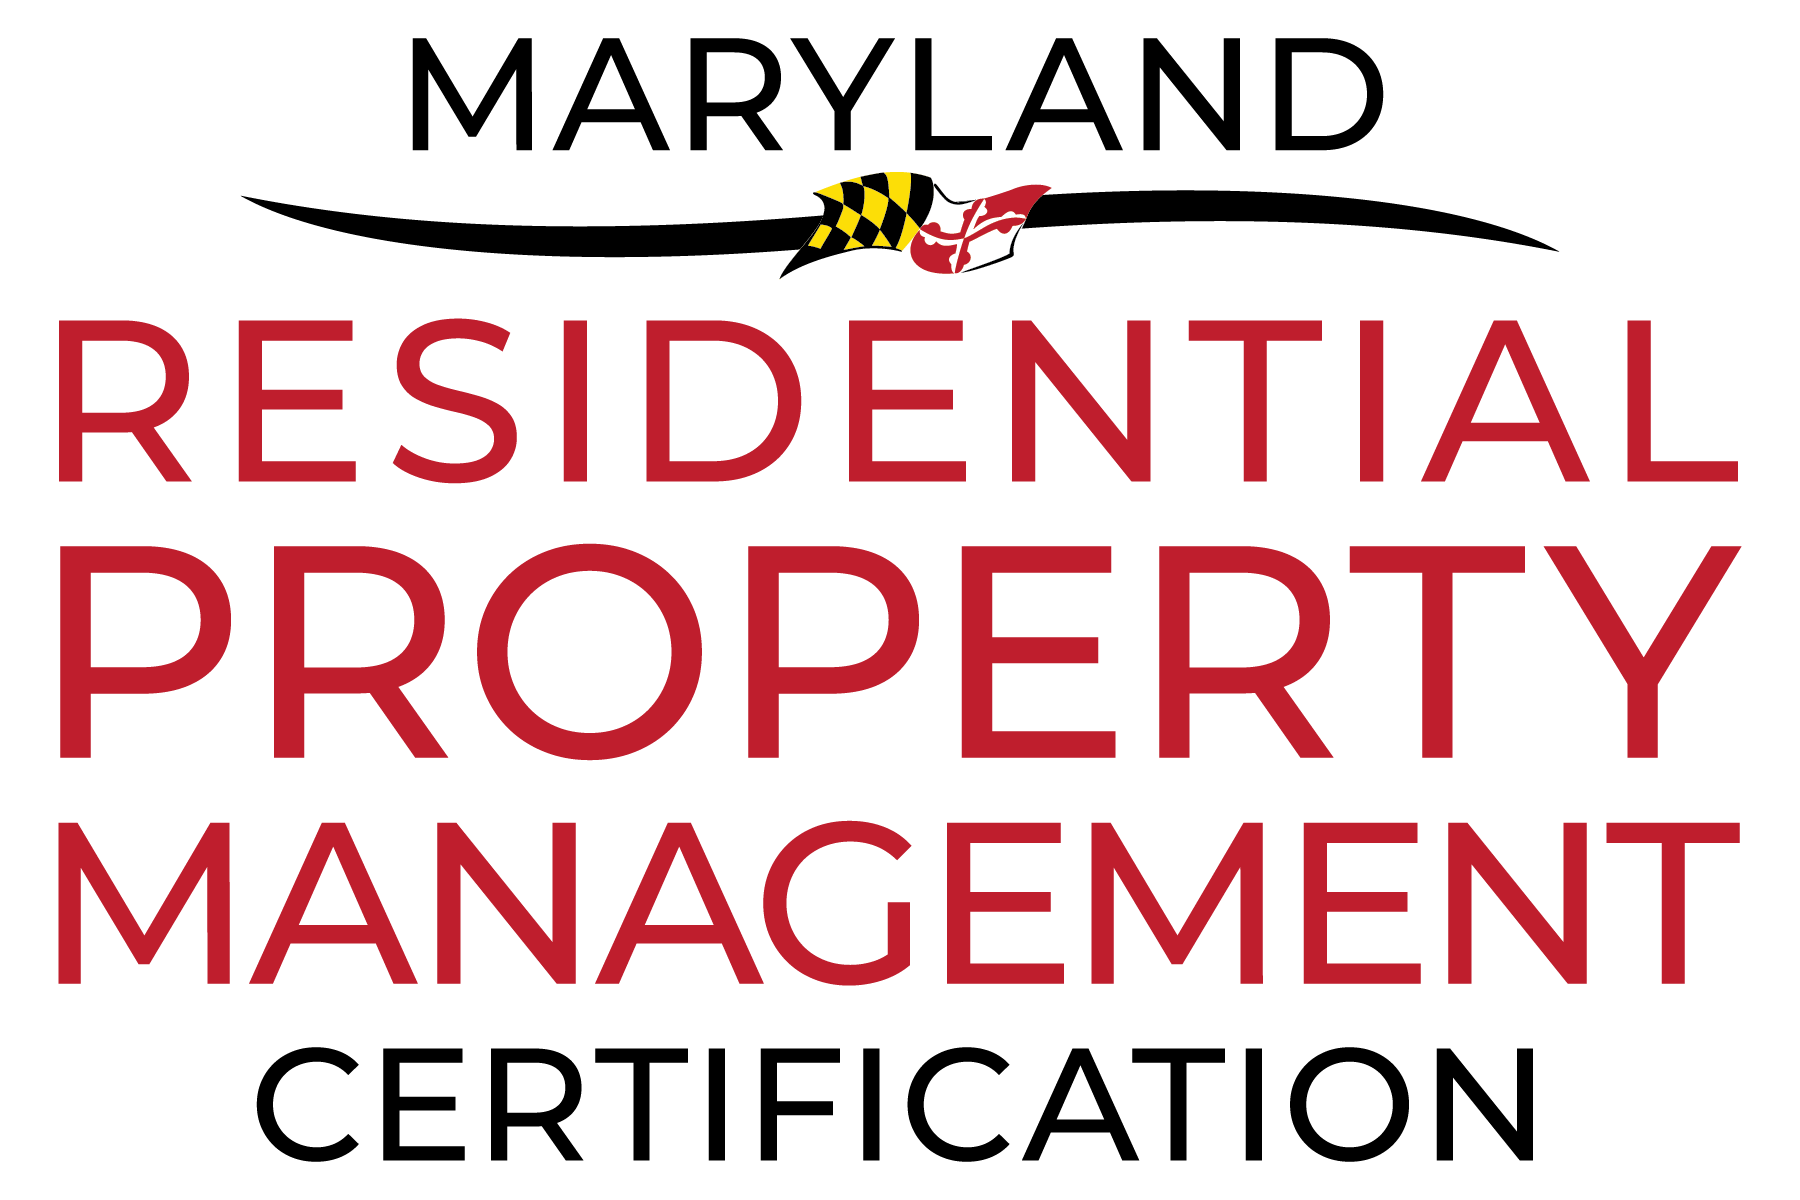 Maryland Residential Property Management Certification